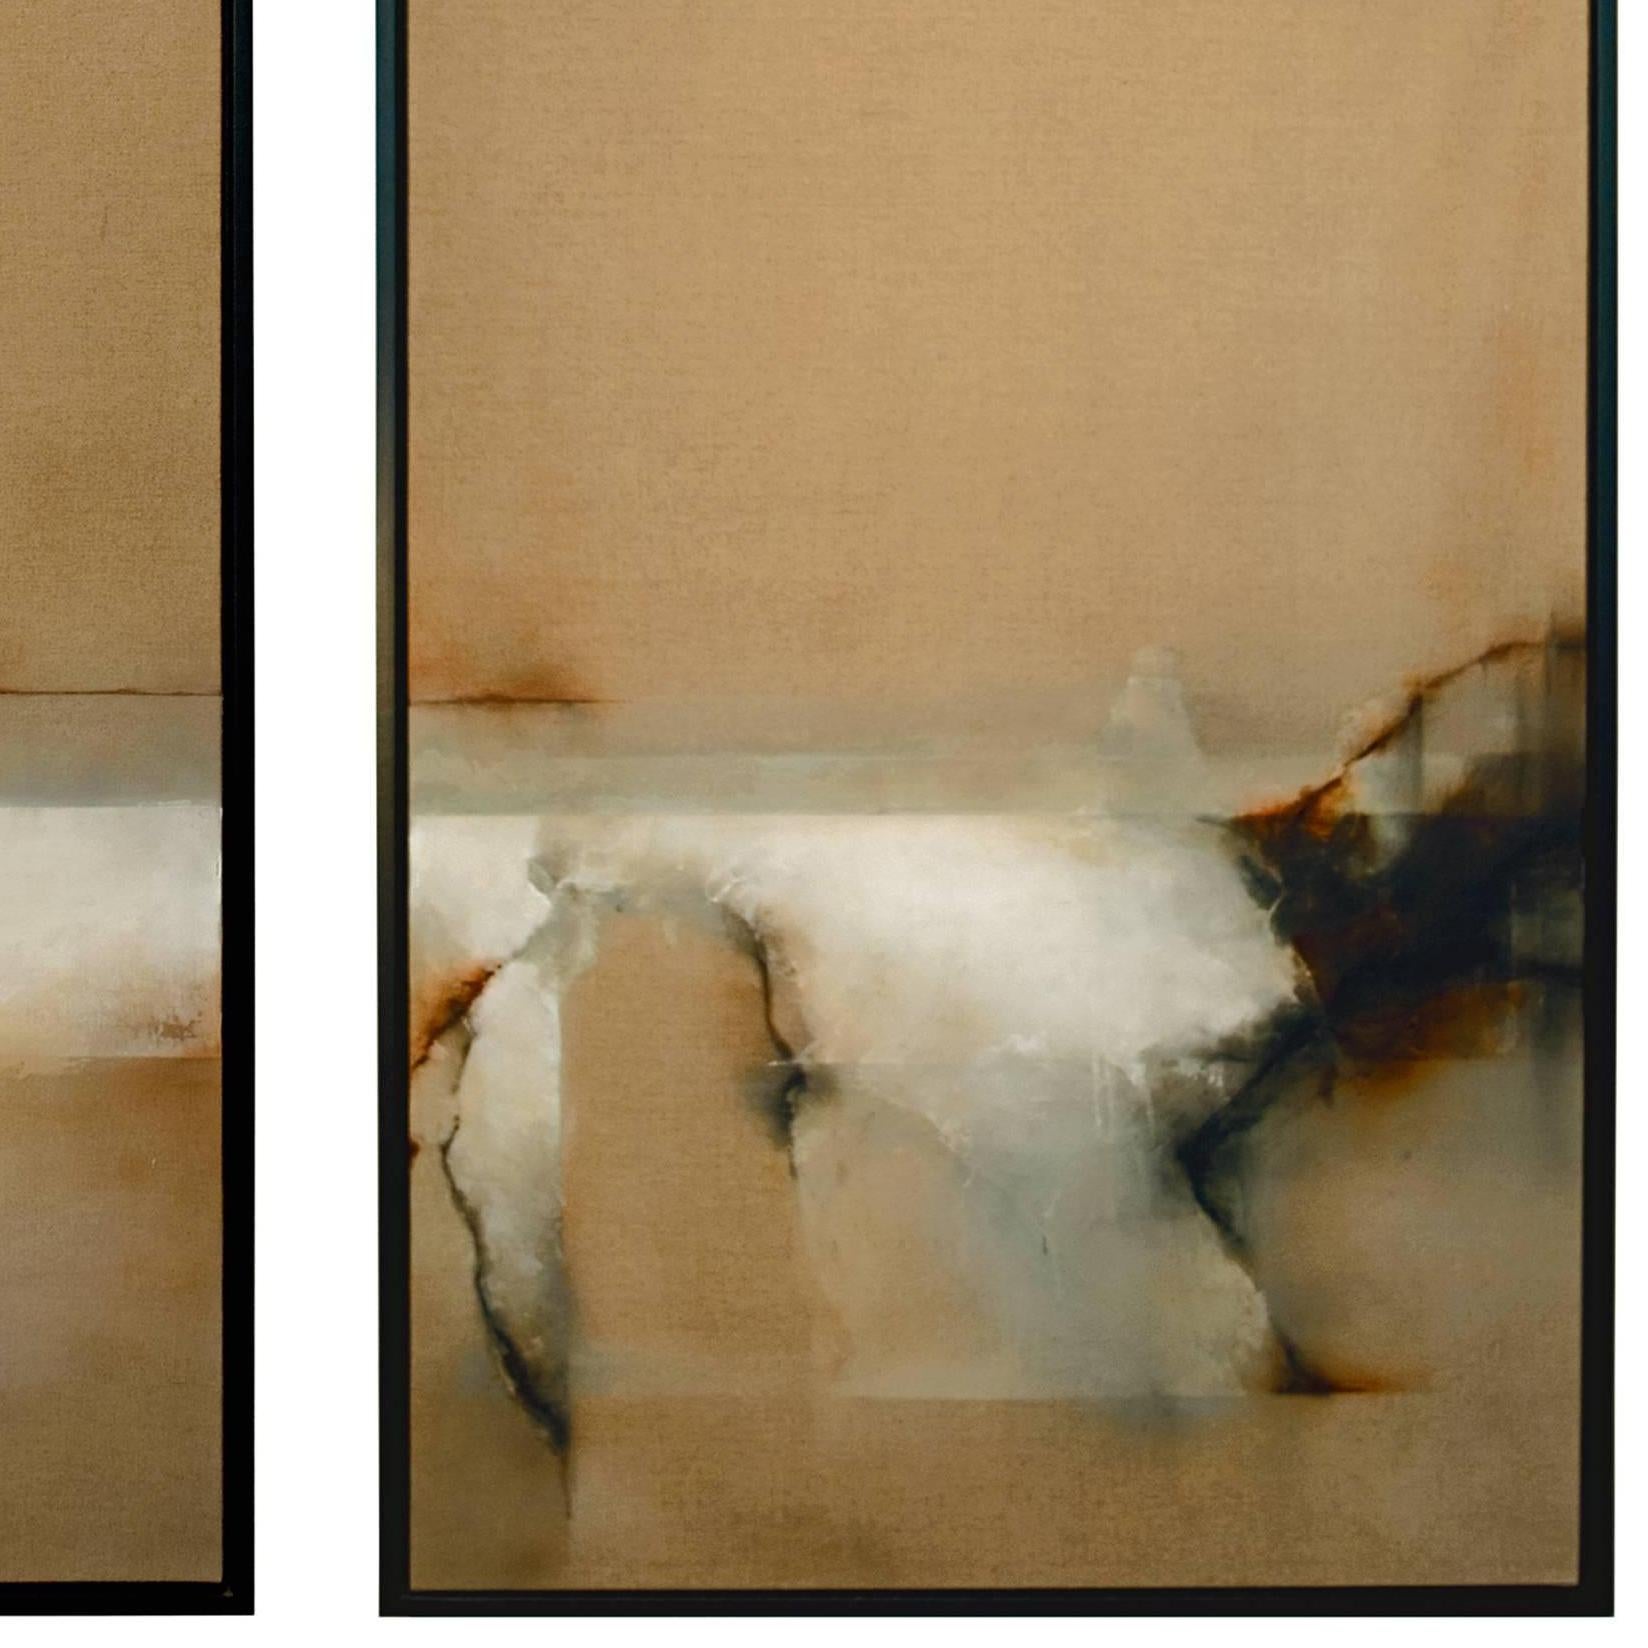 Large Pigment on Canvas Diptych: 'Still Stand' - Abstract Sculpture by David Mellen